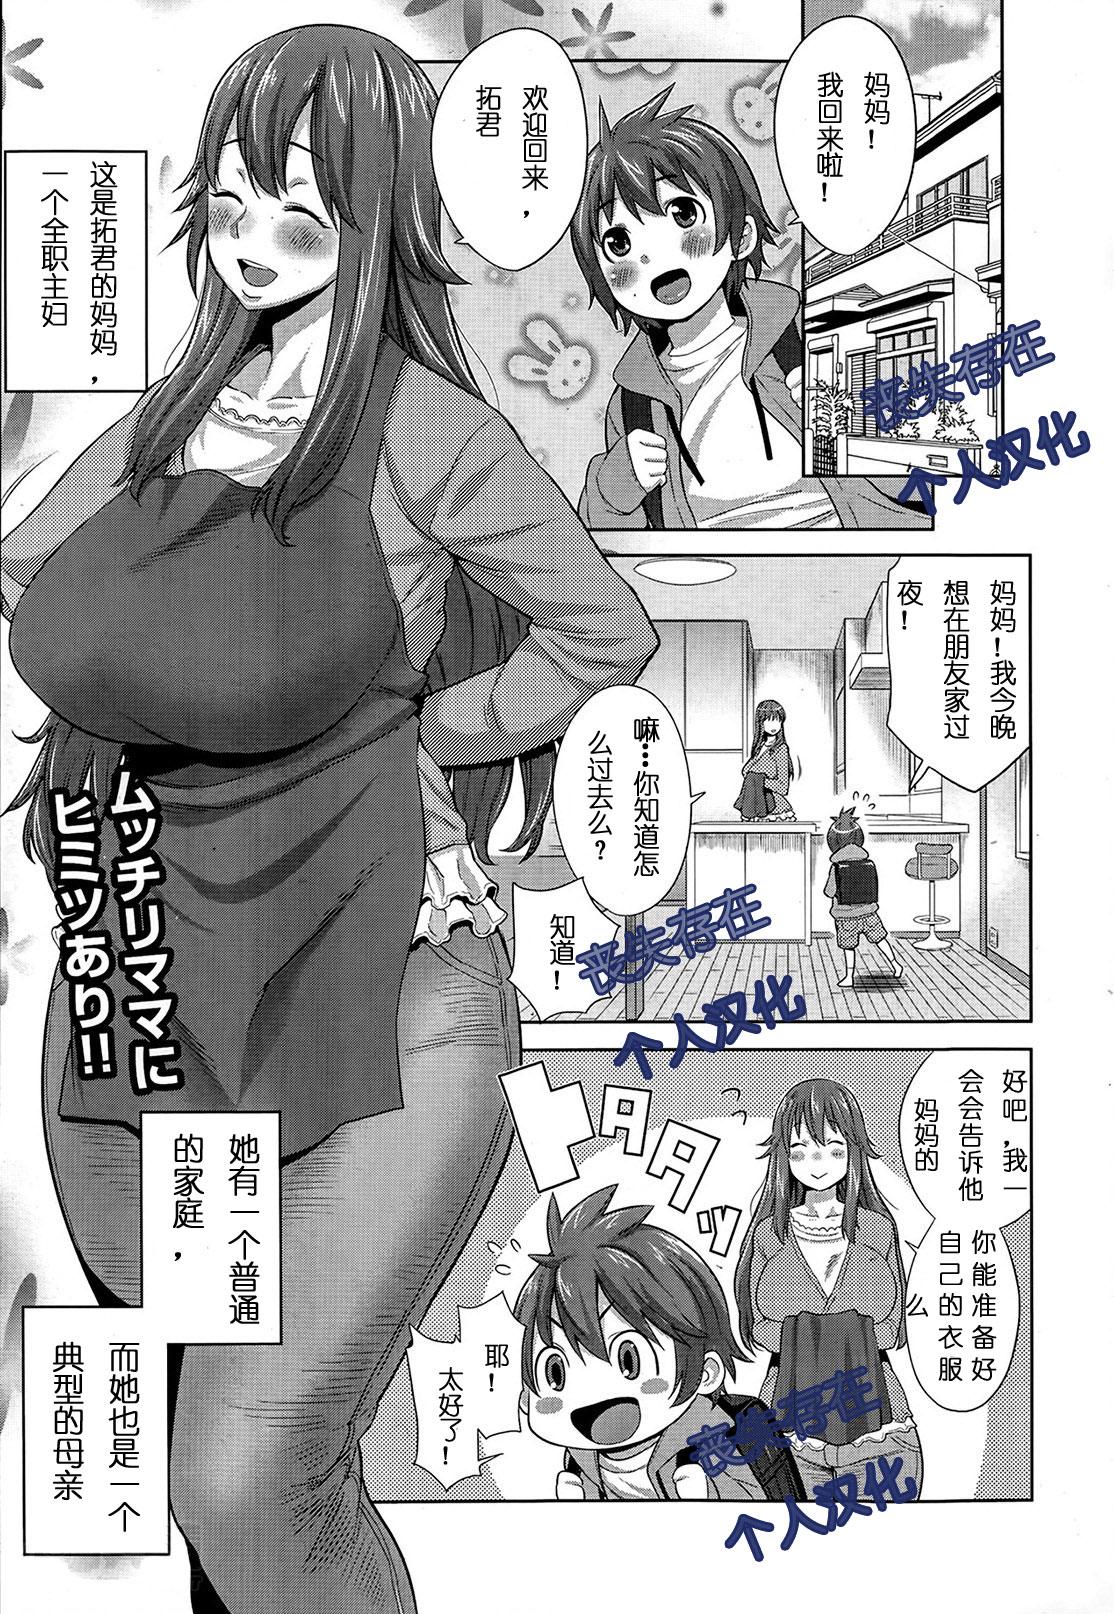 Rico Sono Haha, Chijo ni Tsuki | This Mother is a Pervert Anale - Page 1